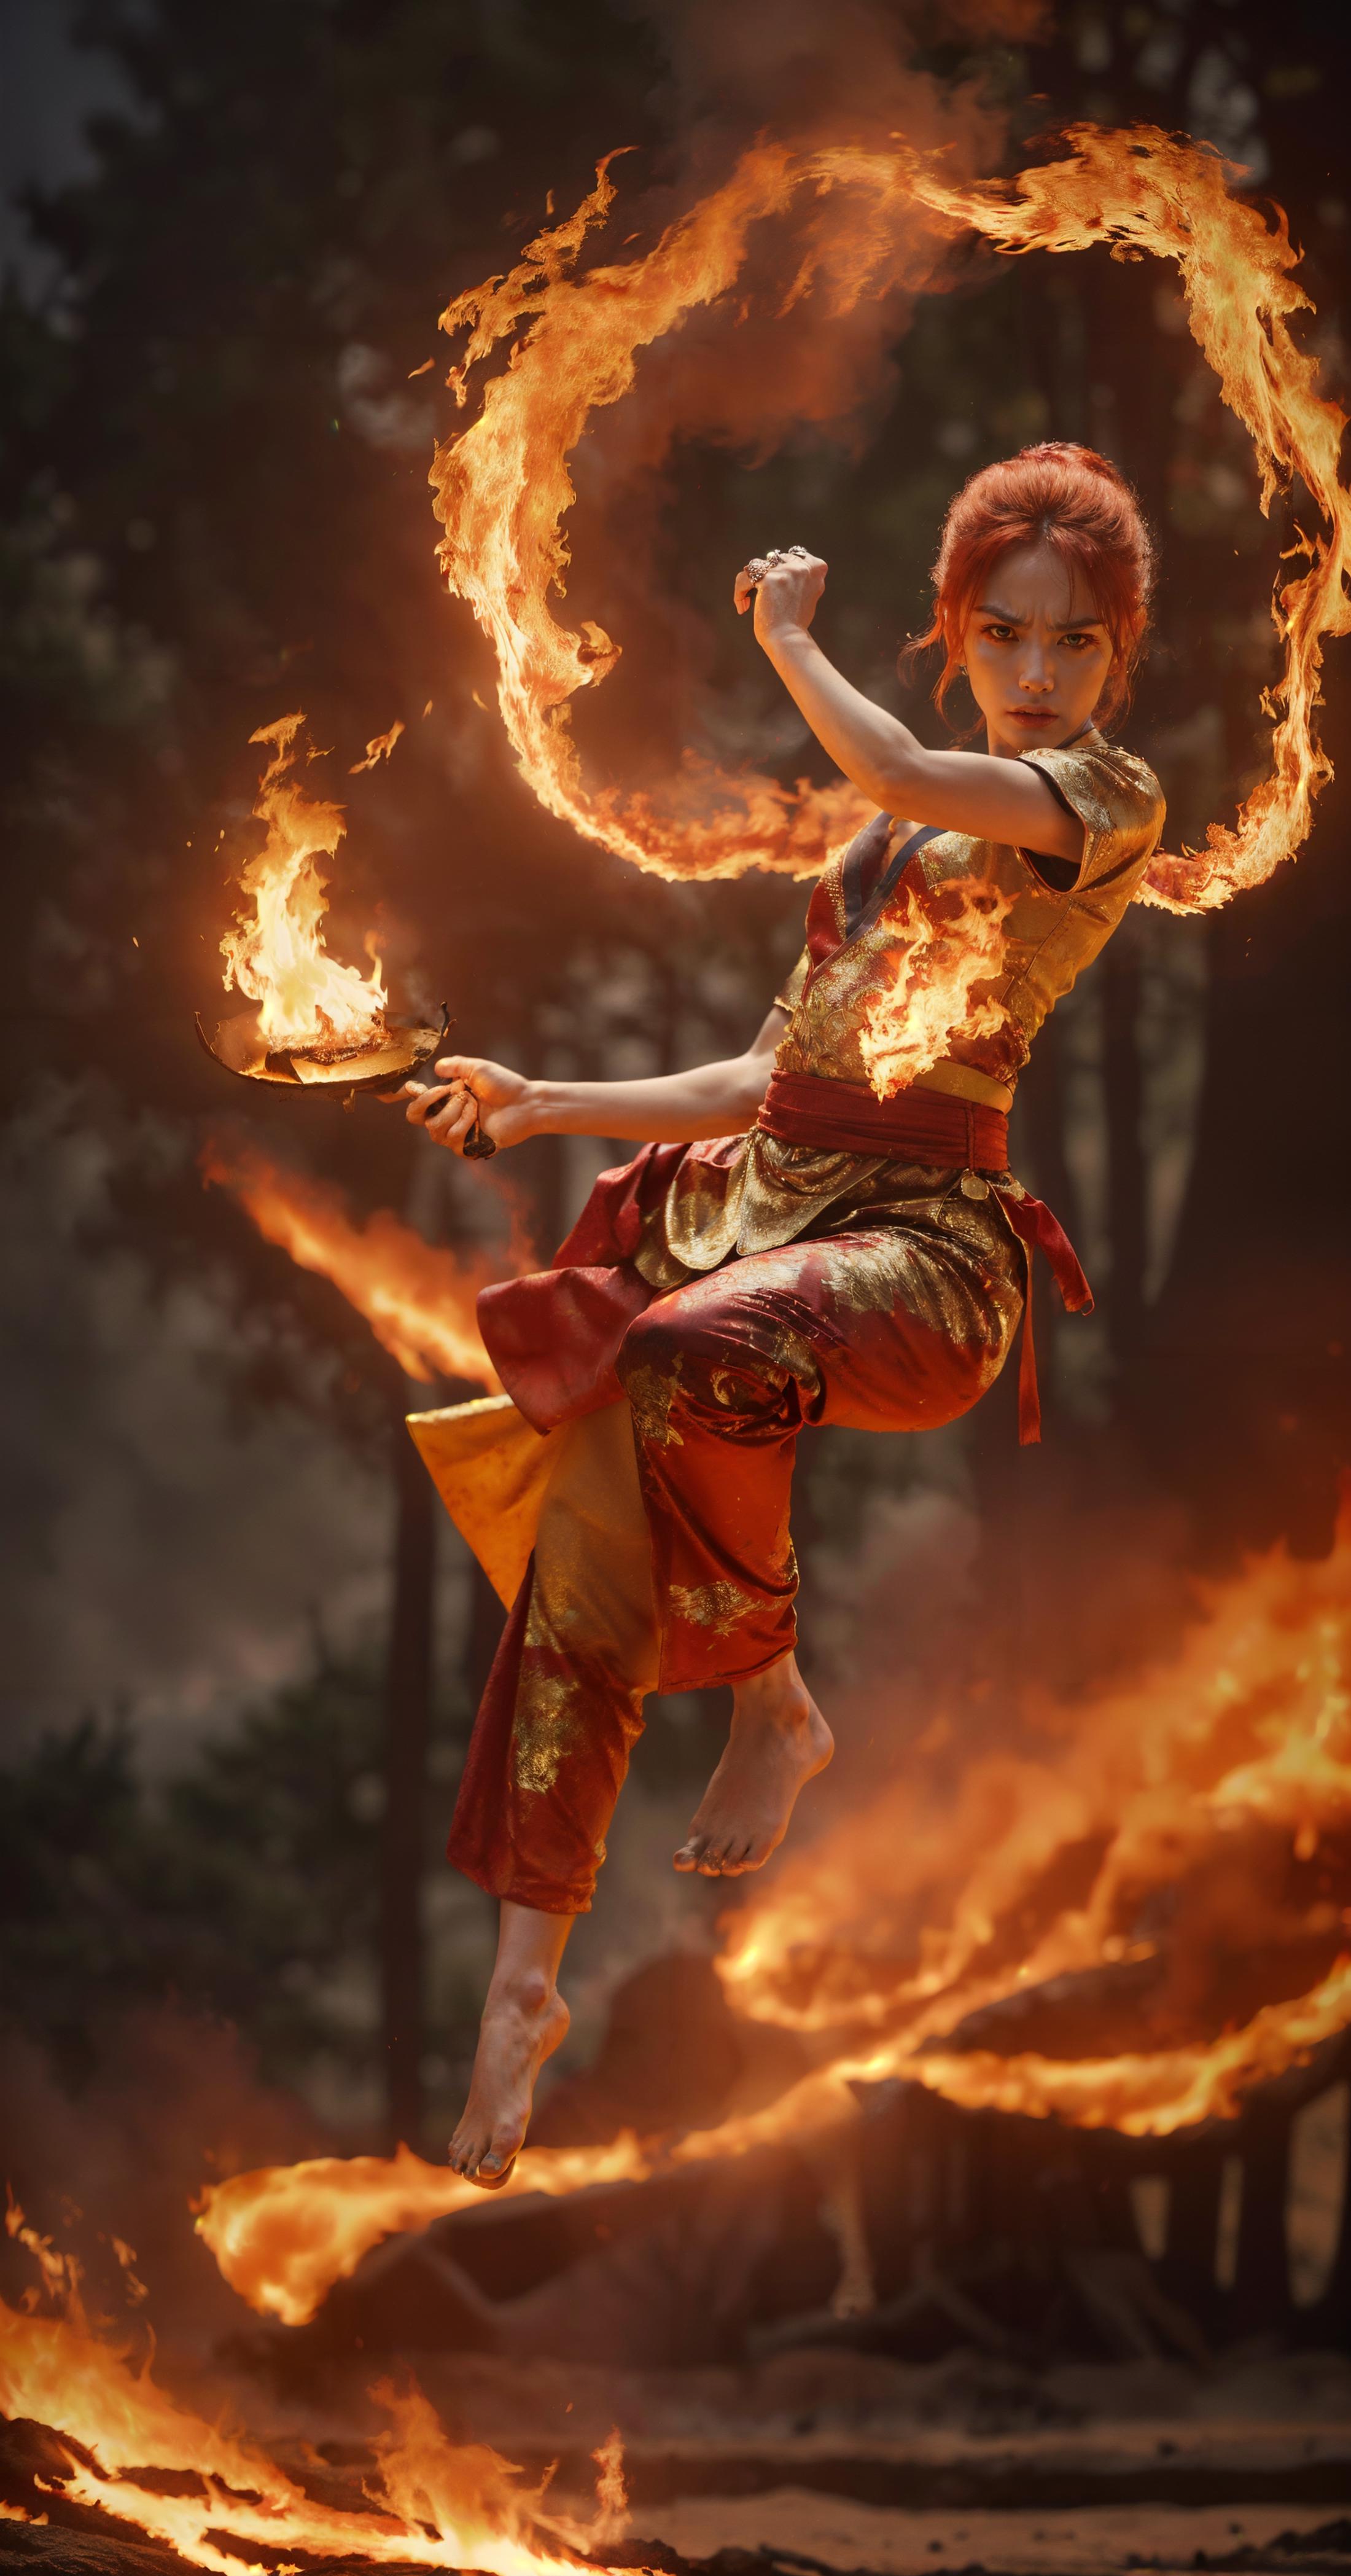 Woman with red hair and a golden dress performing a dance with fire.